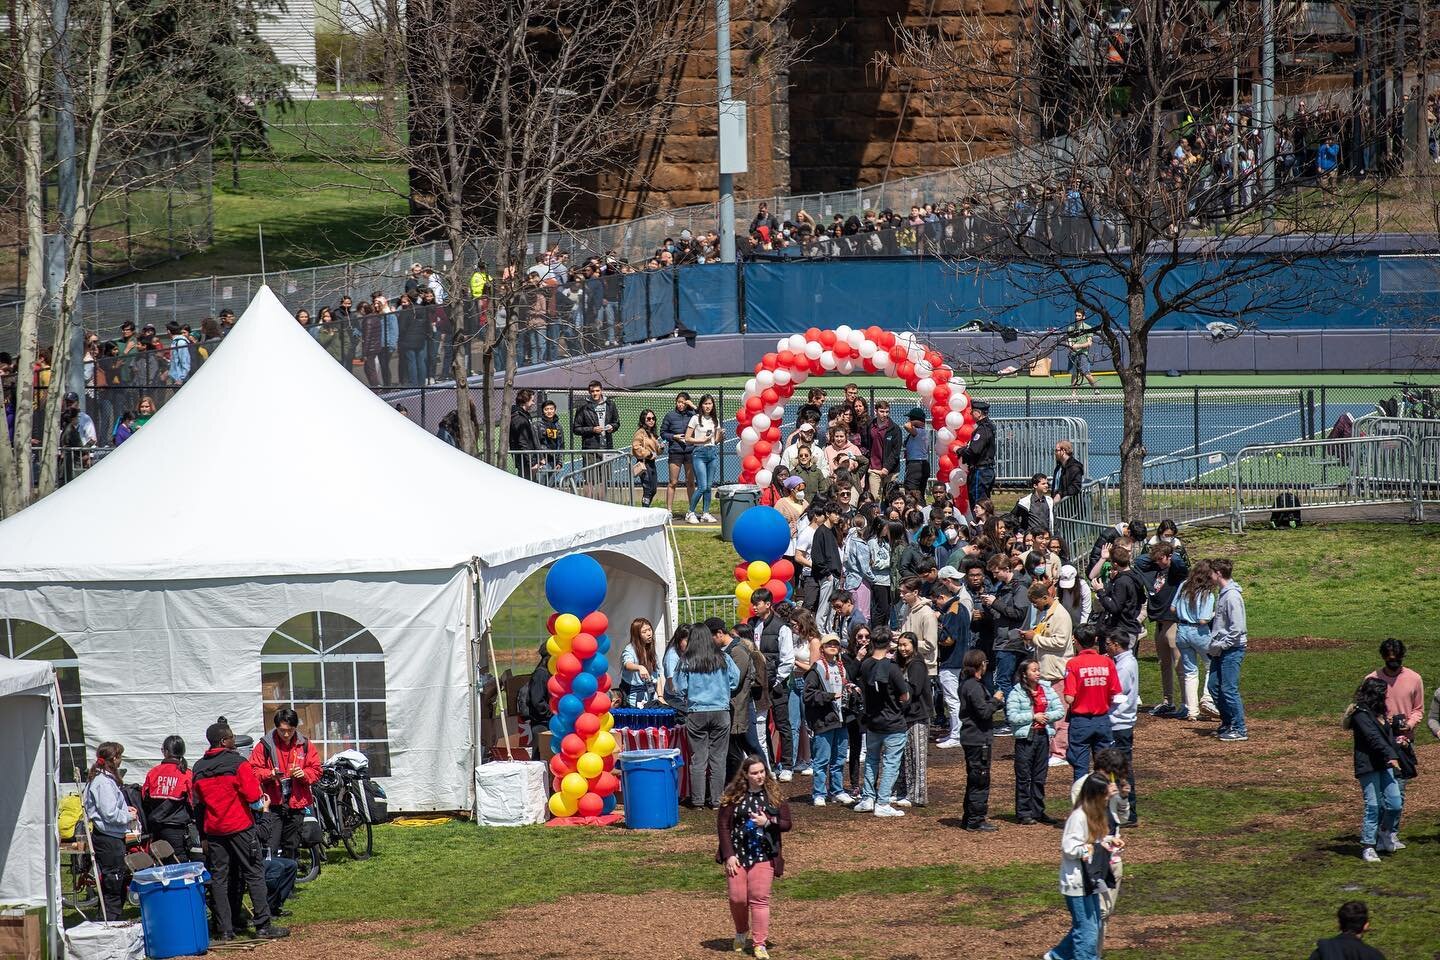 Here are some photos from Daytime Fling. Thank you to everyone for showing up and making Spring Fling 2022 a success! We broke 2019&rsquo;s attendance, which was right around 4,000. We&rsquo;re super excited for the upcoming 50th year anniversary. St